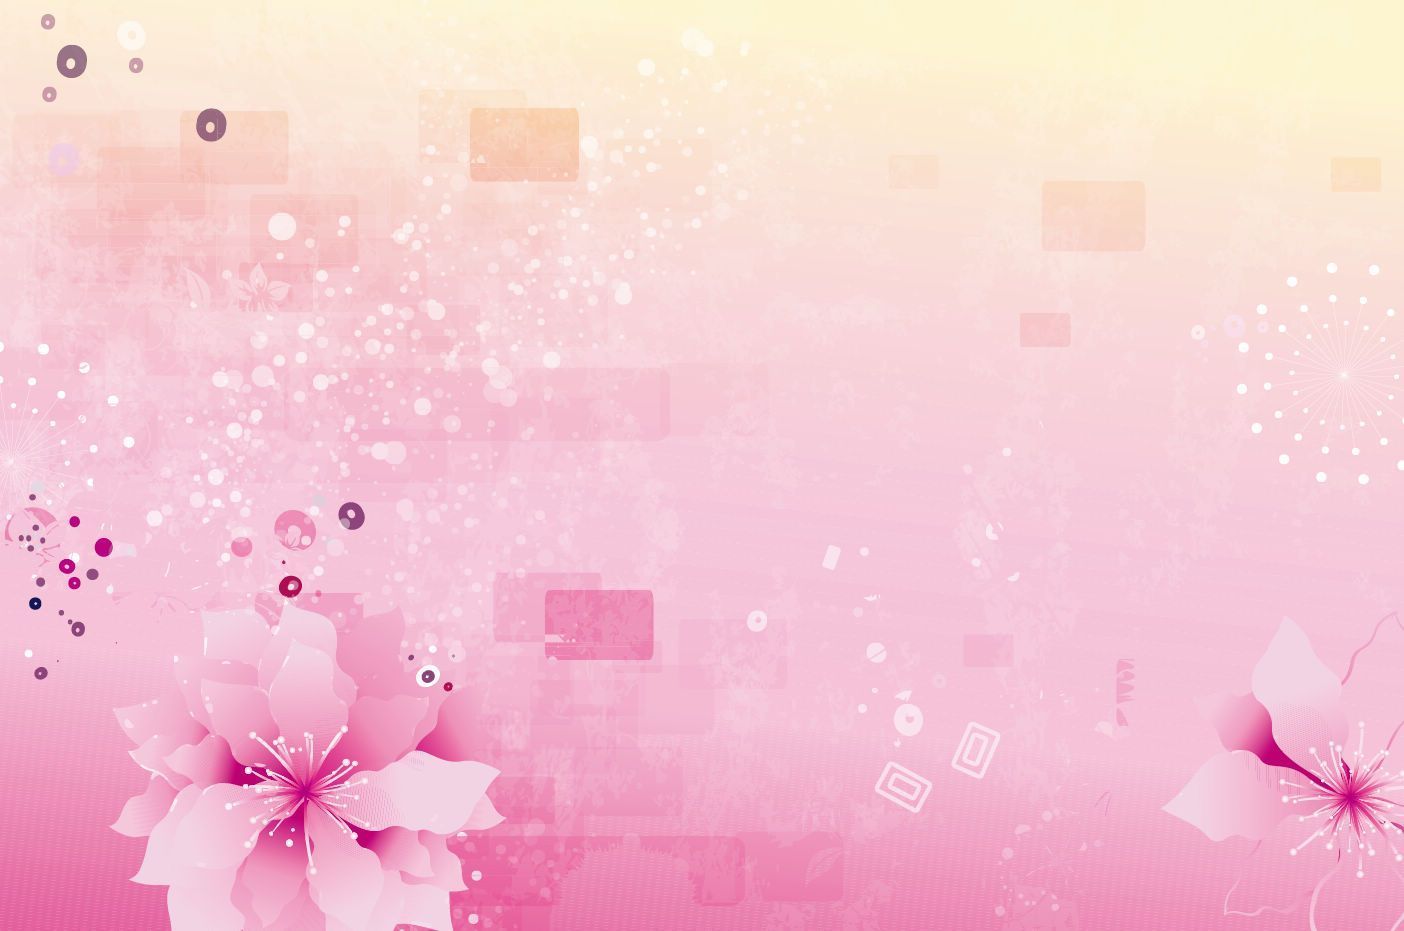 Flowers PPT Backgrounds Templates - Download Free Flowers ...